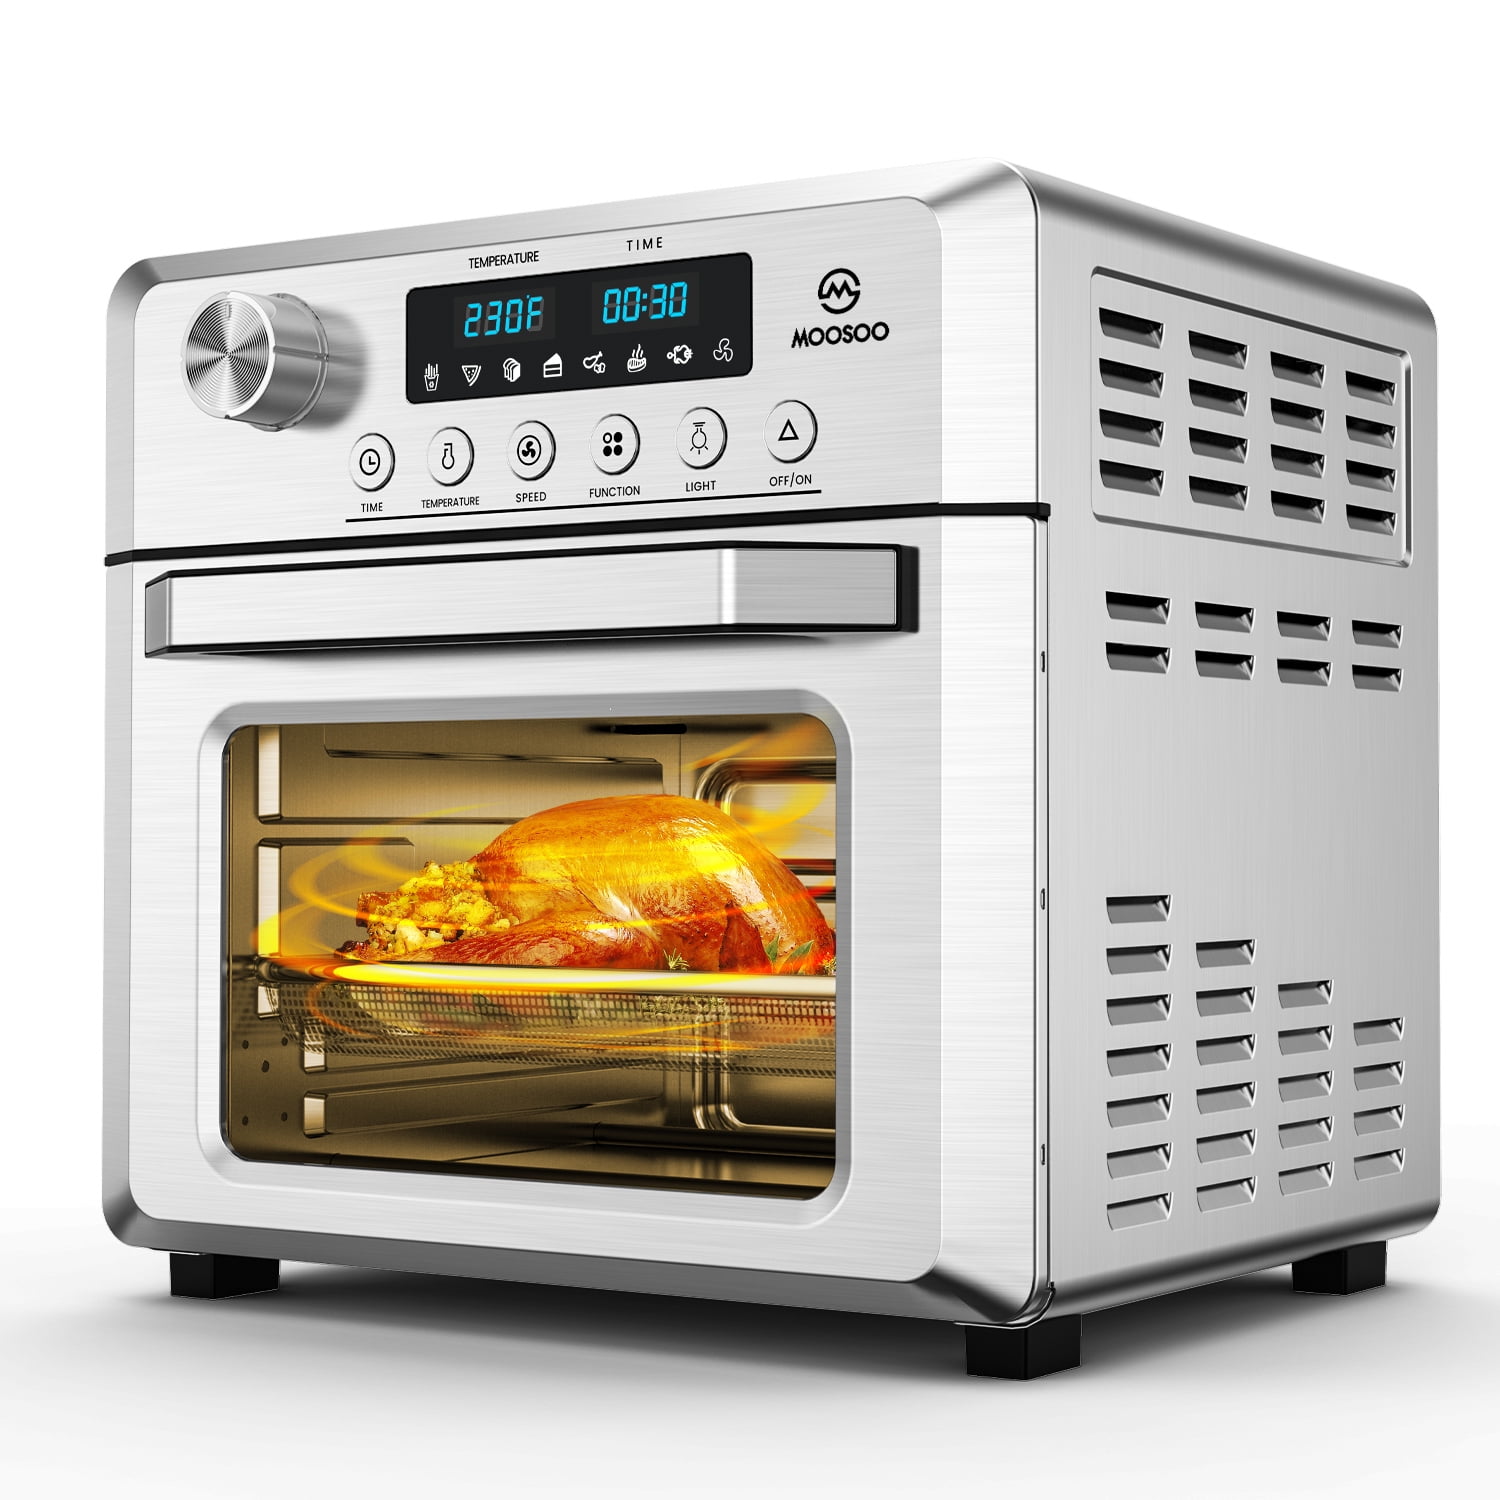 MOOSOO MA50 12L 1800W Air Fryer Oven Toaster Rotisserie and